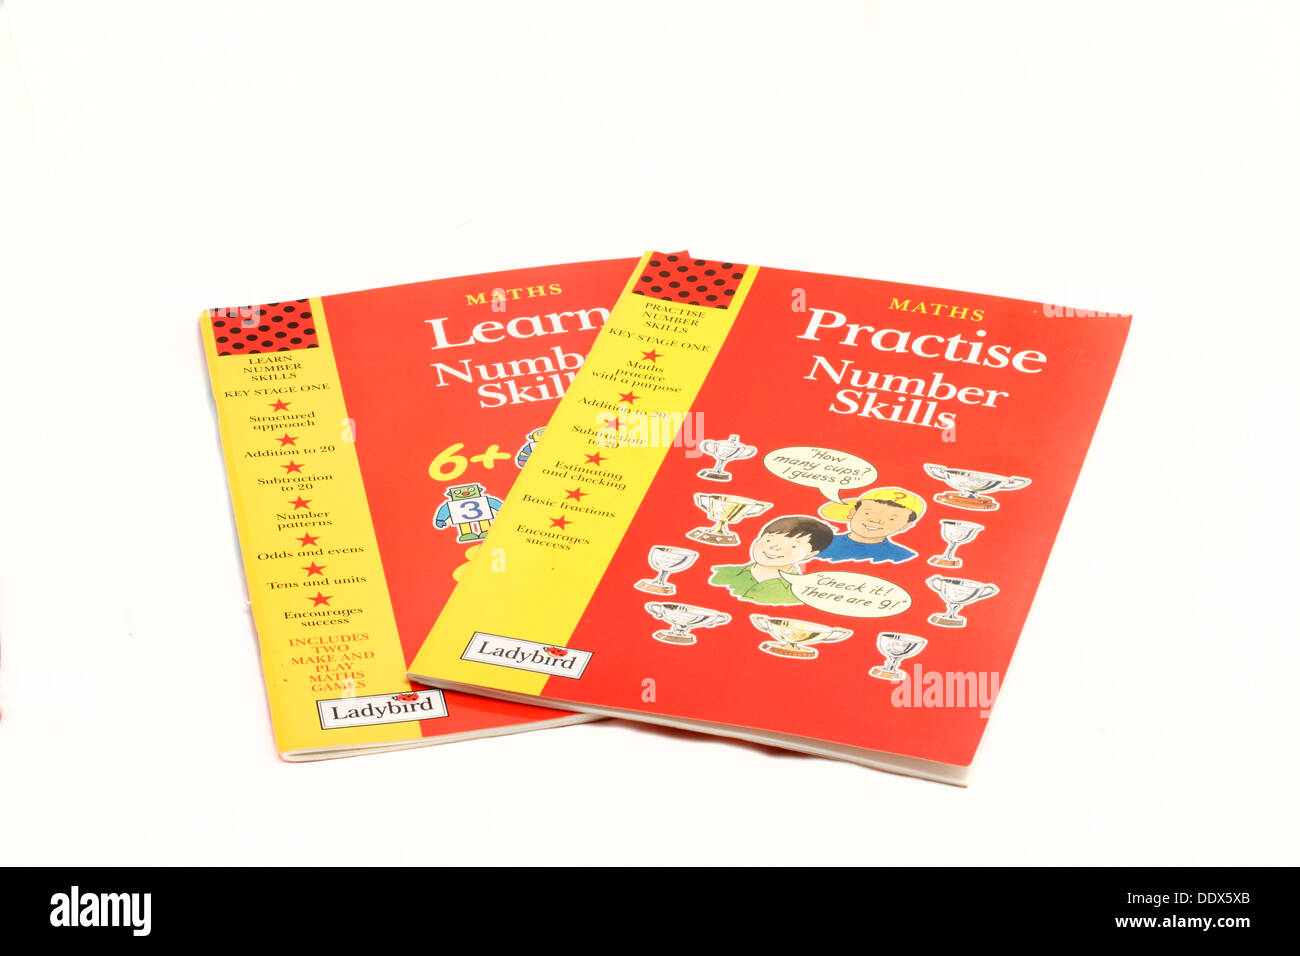 Key Stage One Learn number skills and Practice Number Skills - Ladybird Stock Photo